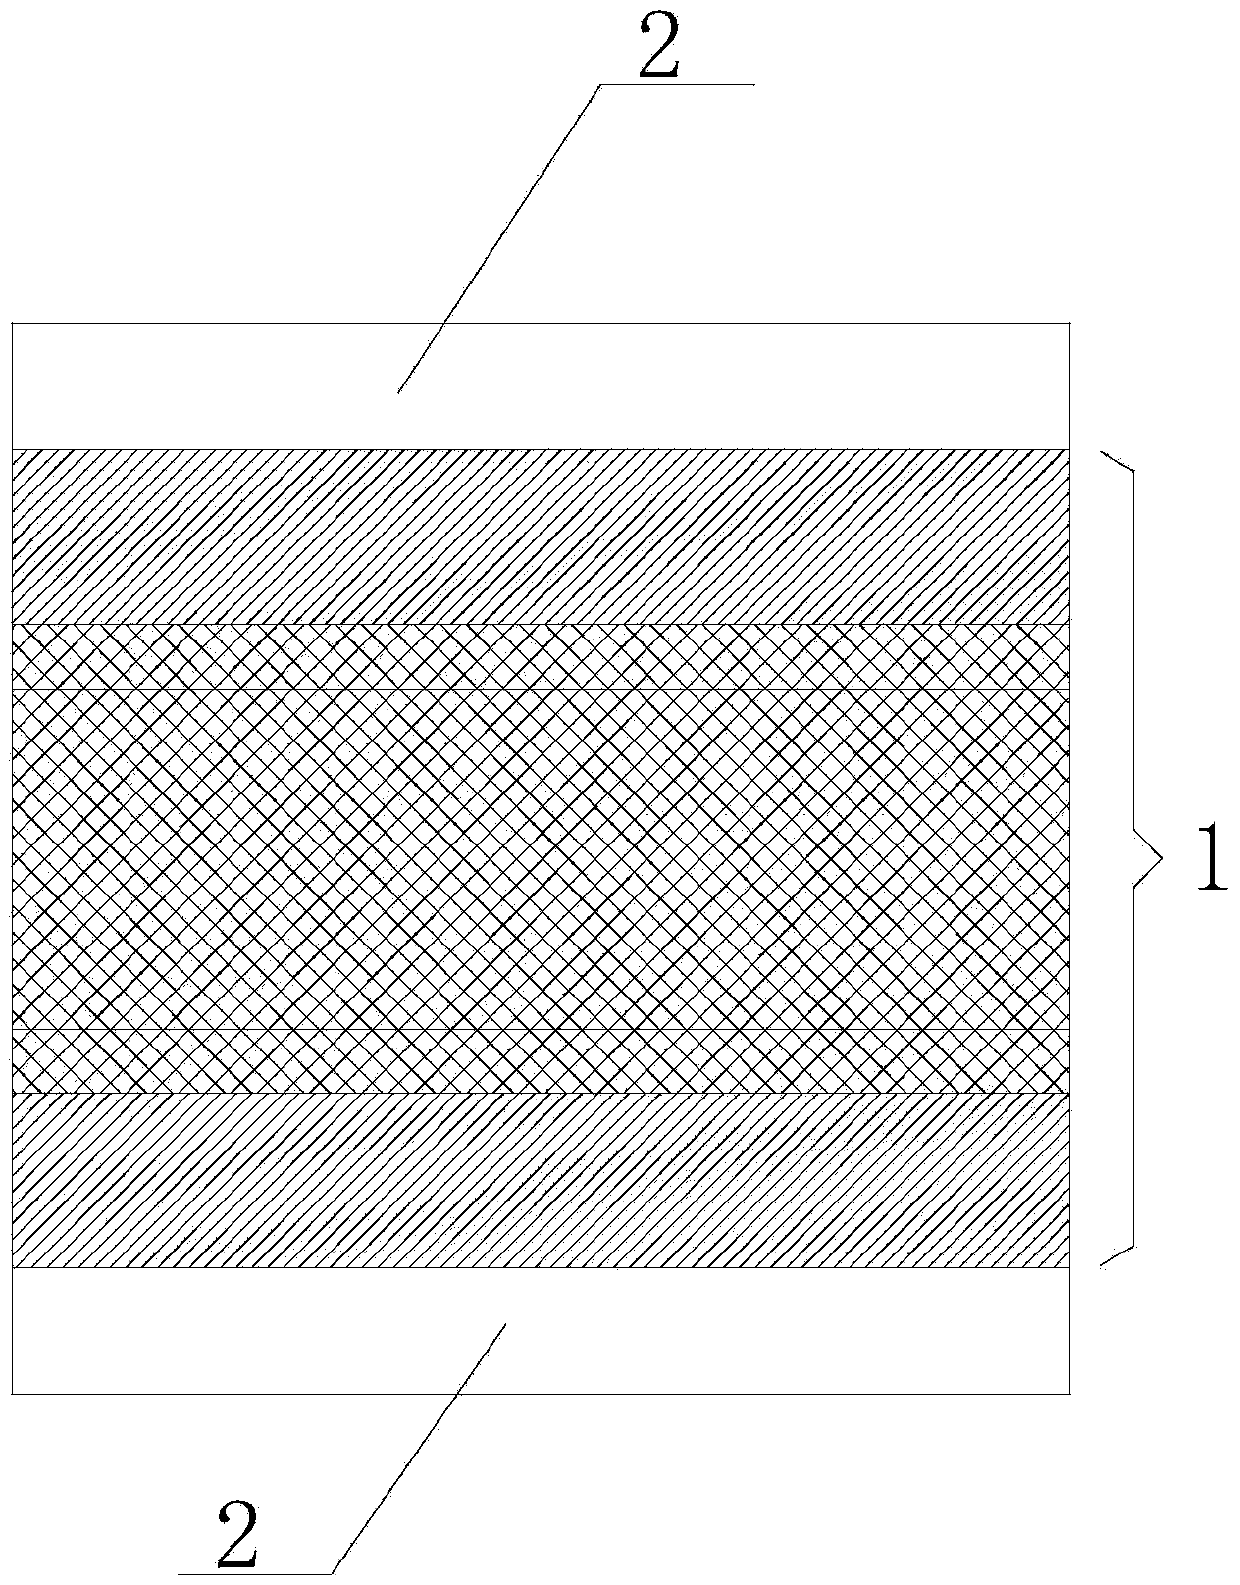 Embedded type thick-film resistor strain sensor and manufacturing method of embedded type thick-film resistor strain sensor